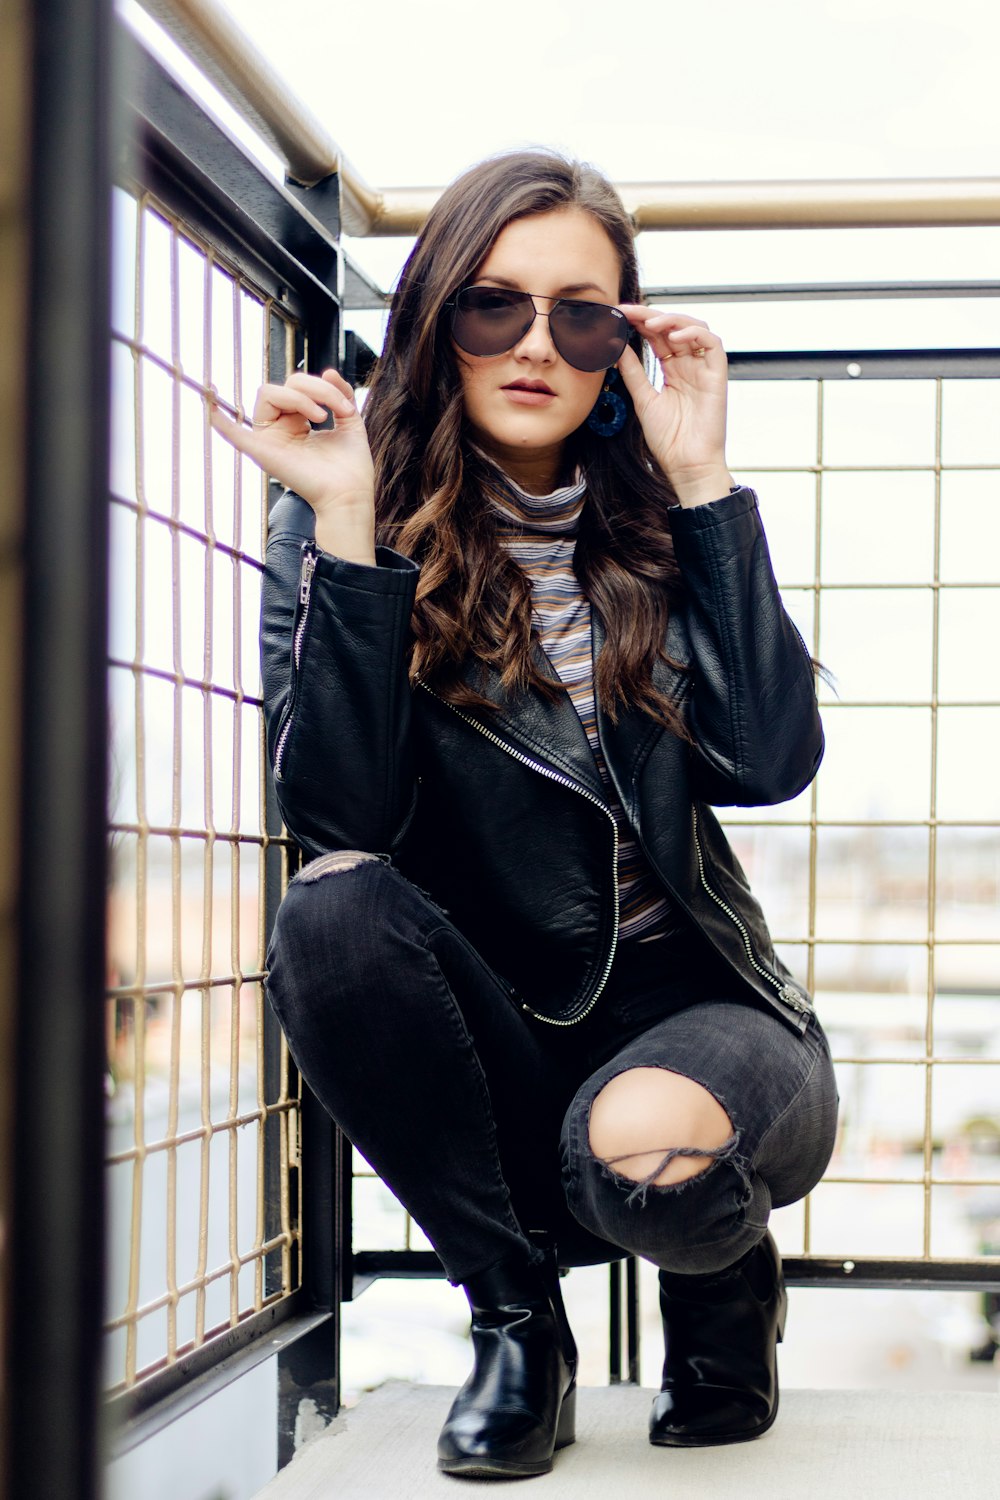 woman wearing sunglasses and blue leather jacket